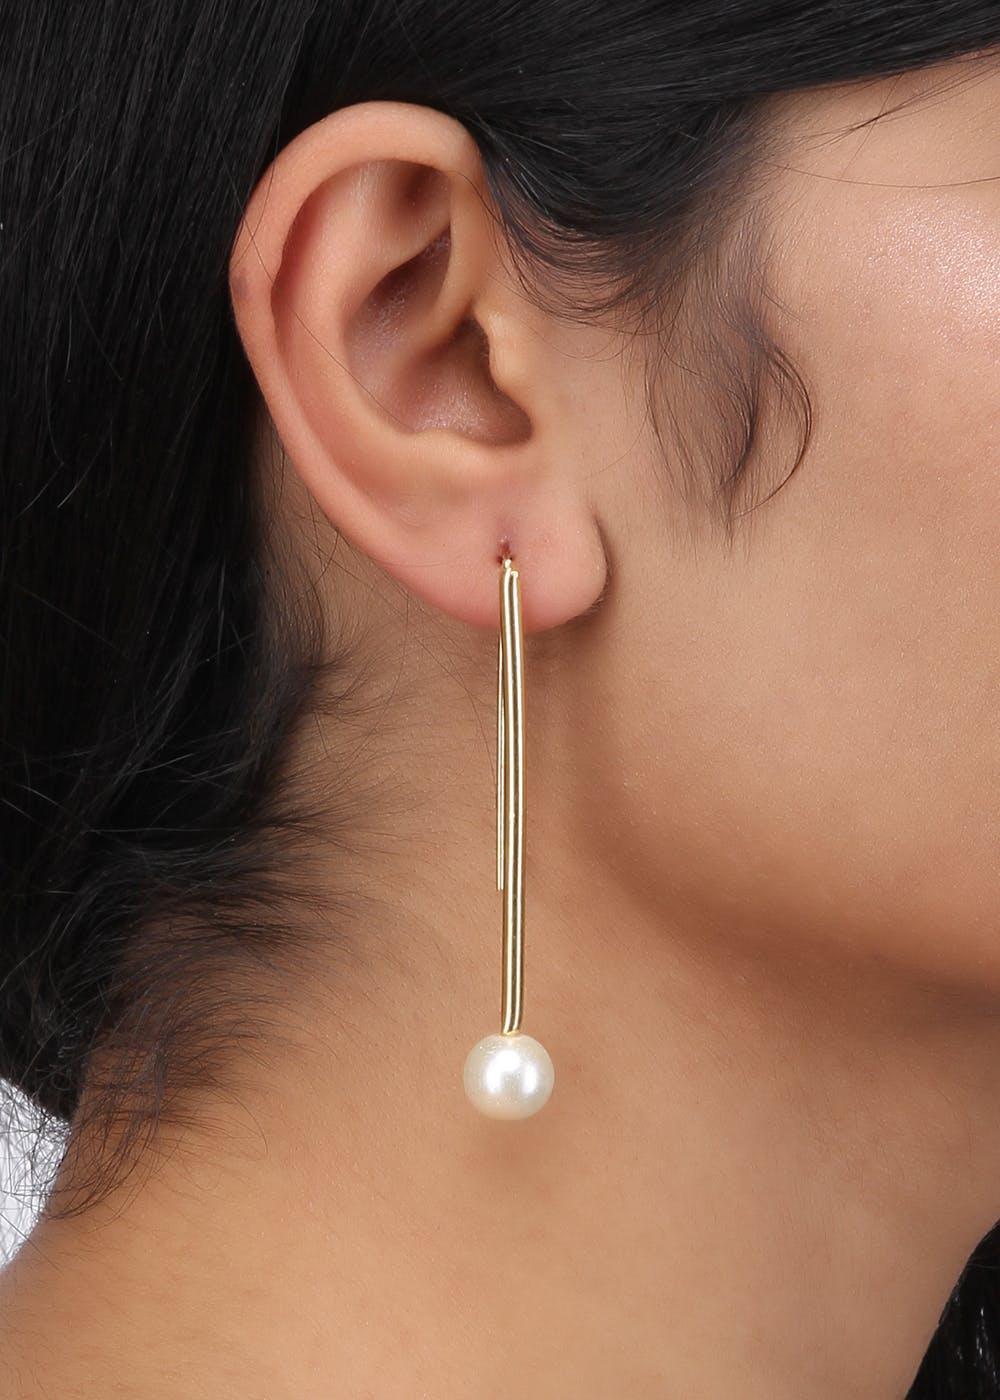 Get Long Gold Chain With Pearl Earrings at  390  LBB Shop